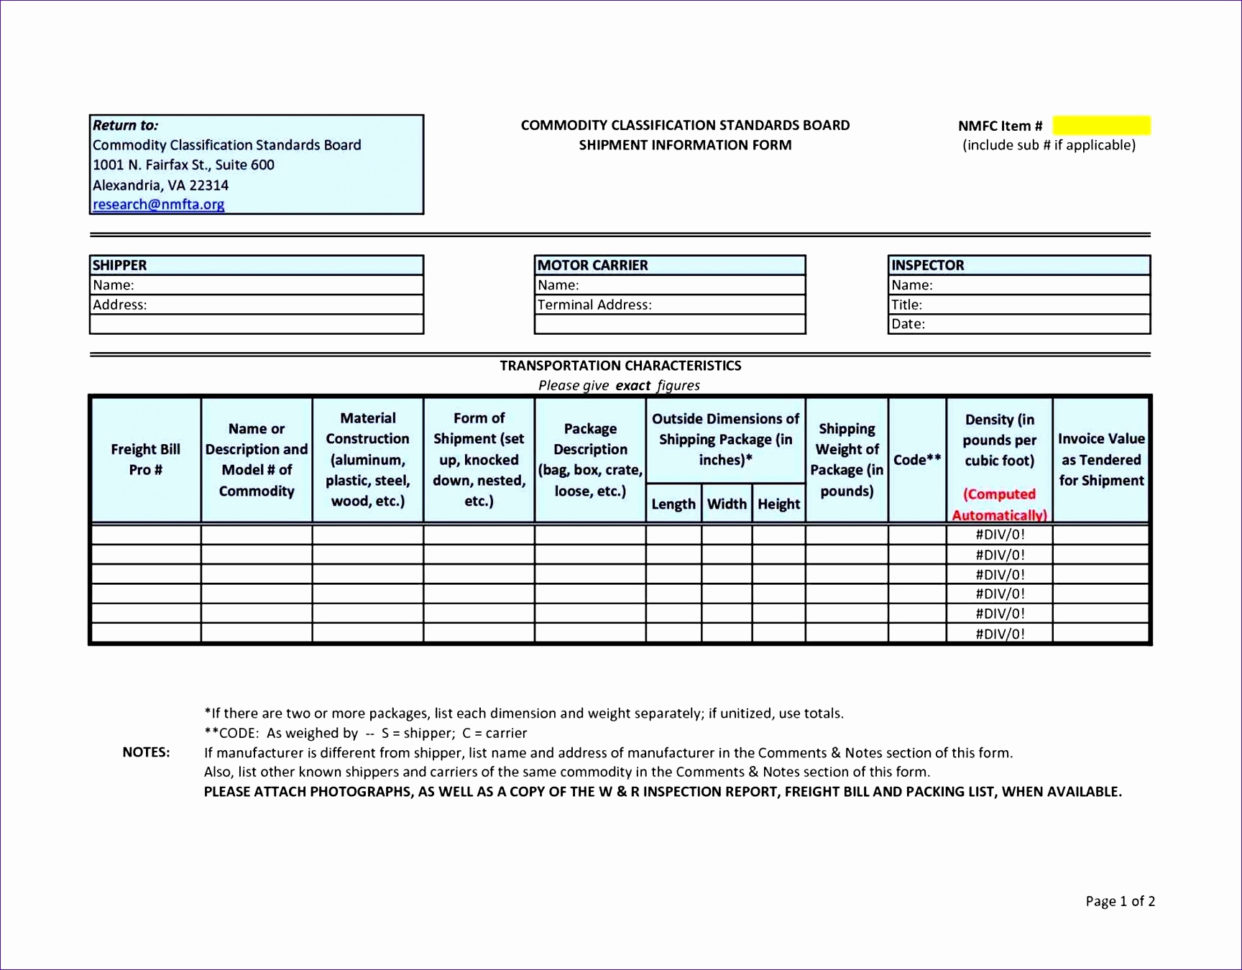 social security income and expenses worksheet